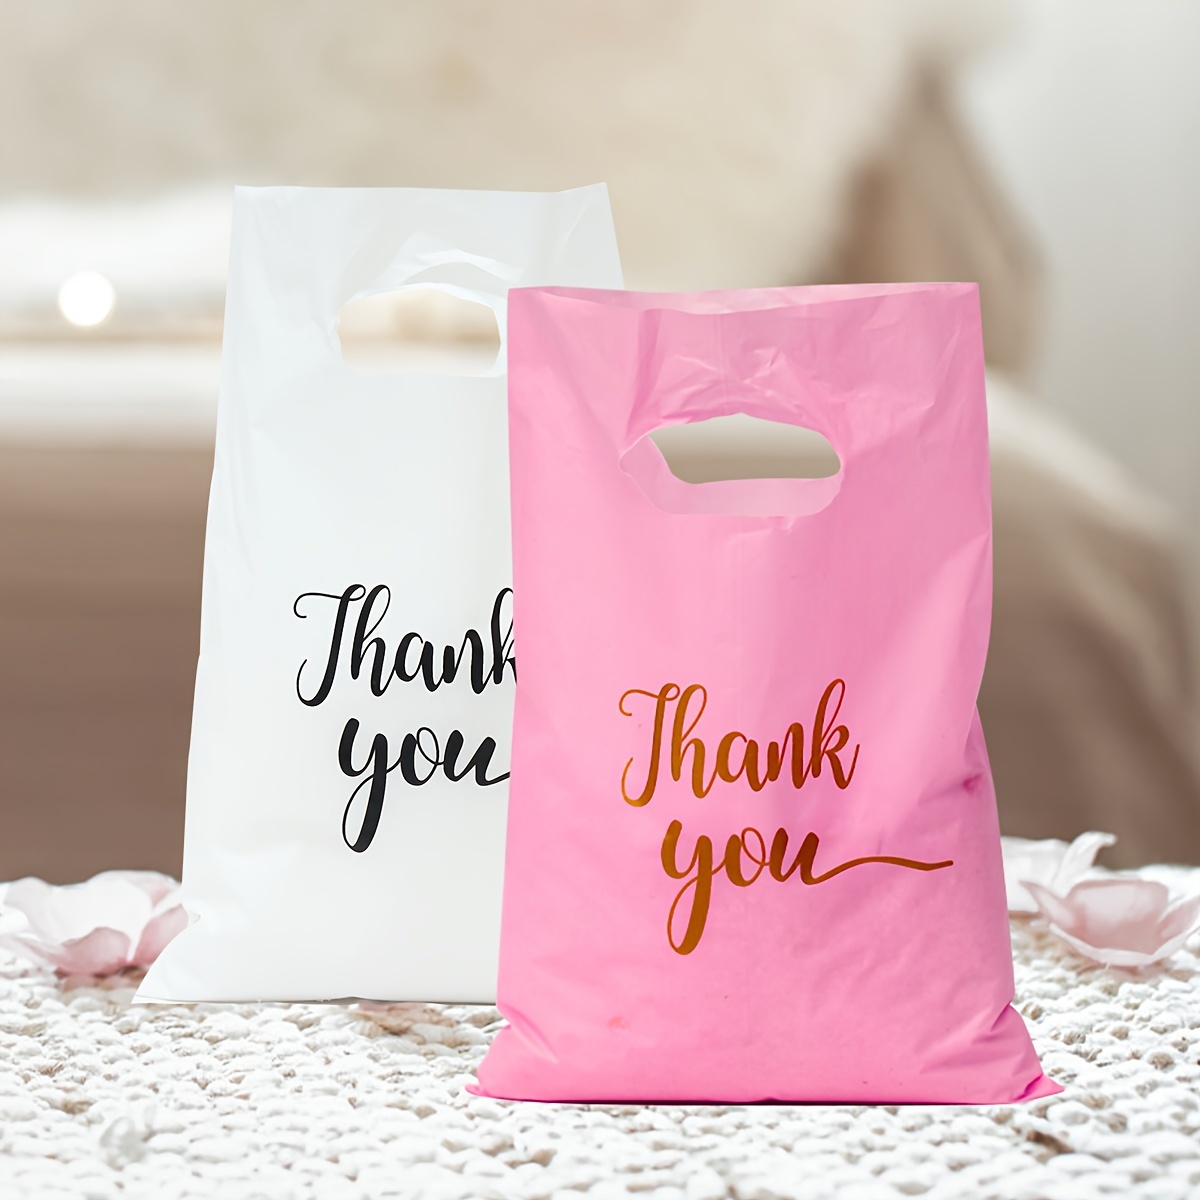 

100pcs, Thank You Plastic Candy Bags Wedding Gifts Packing Bag For Guests Baptism Favors Happy Birthday Party Decor Shopping Handbags Small Business Supplies